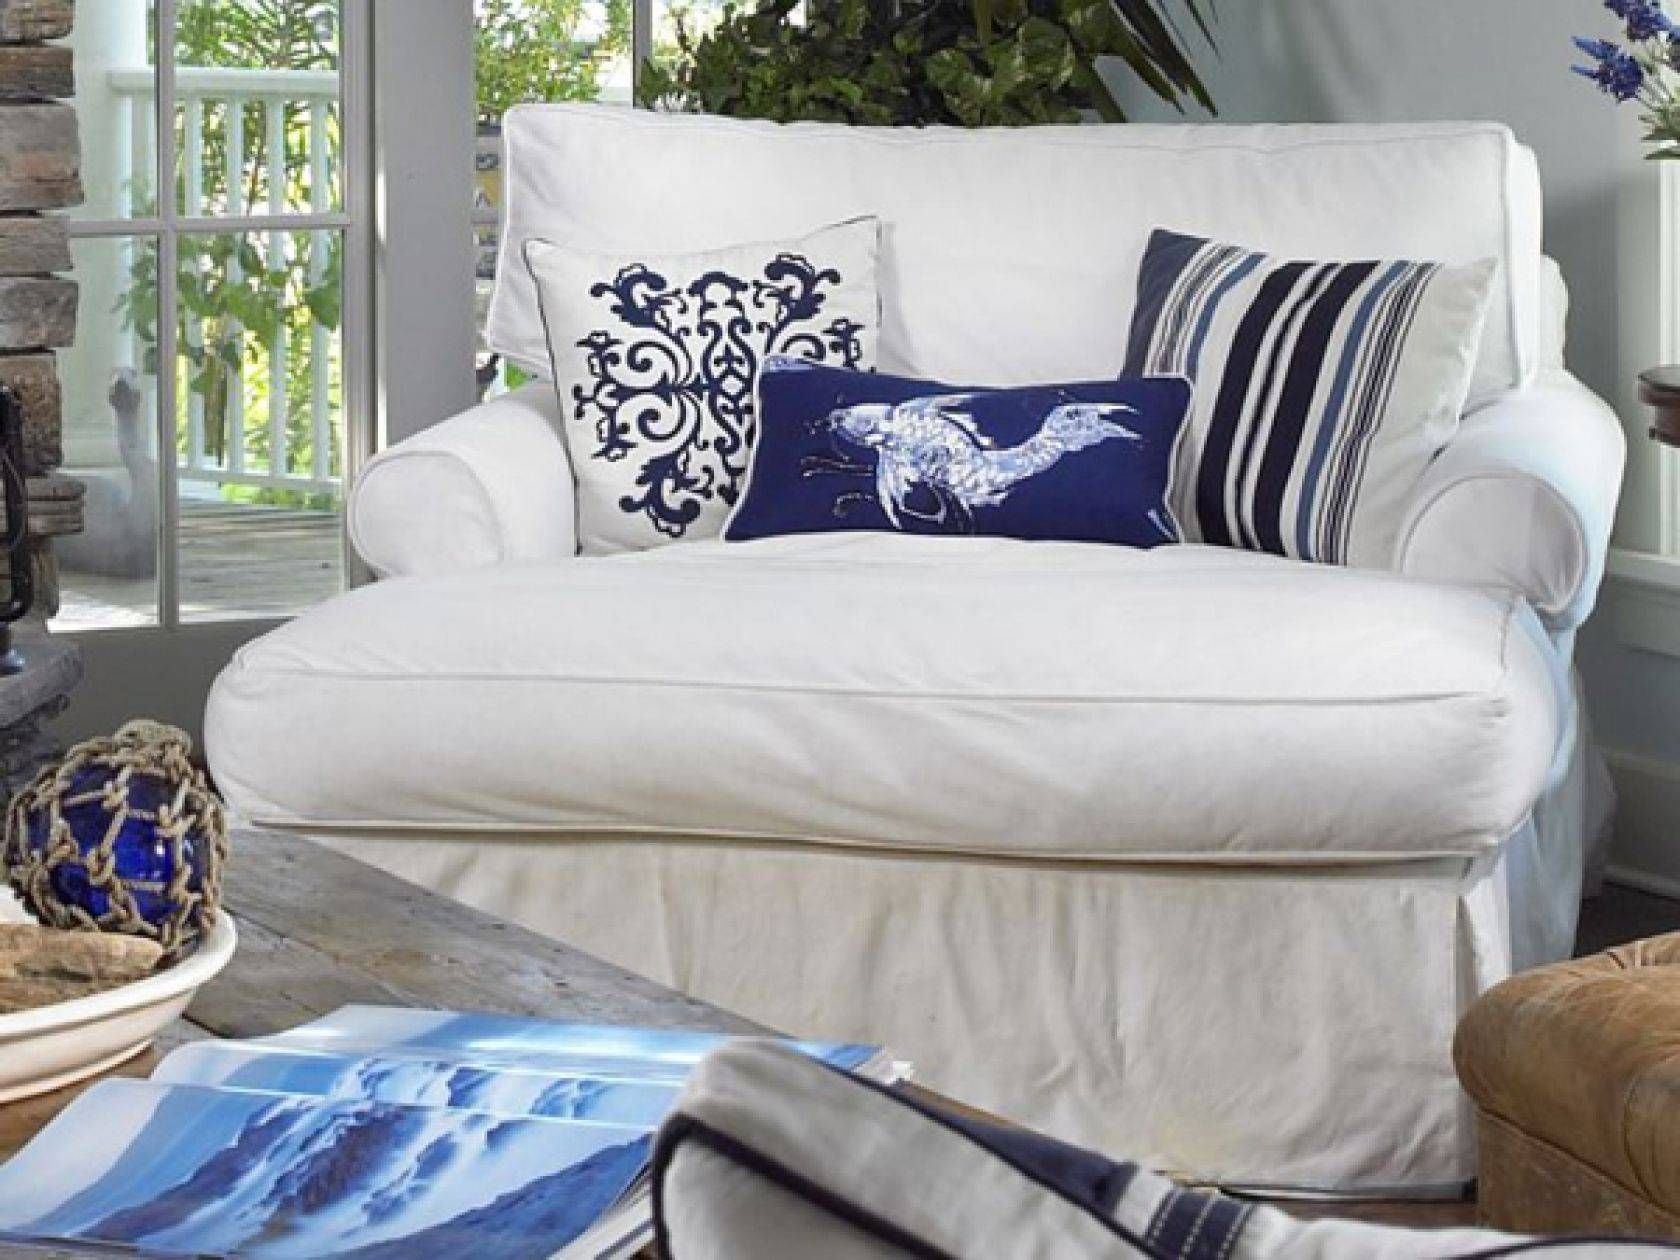 Slipcovered Furniture: Chairs, Sectionals & Sofas In Slipcover Fabrics In Blue Slipcover Sofas (View 3 of 15)